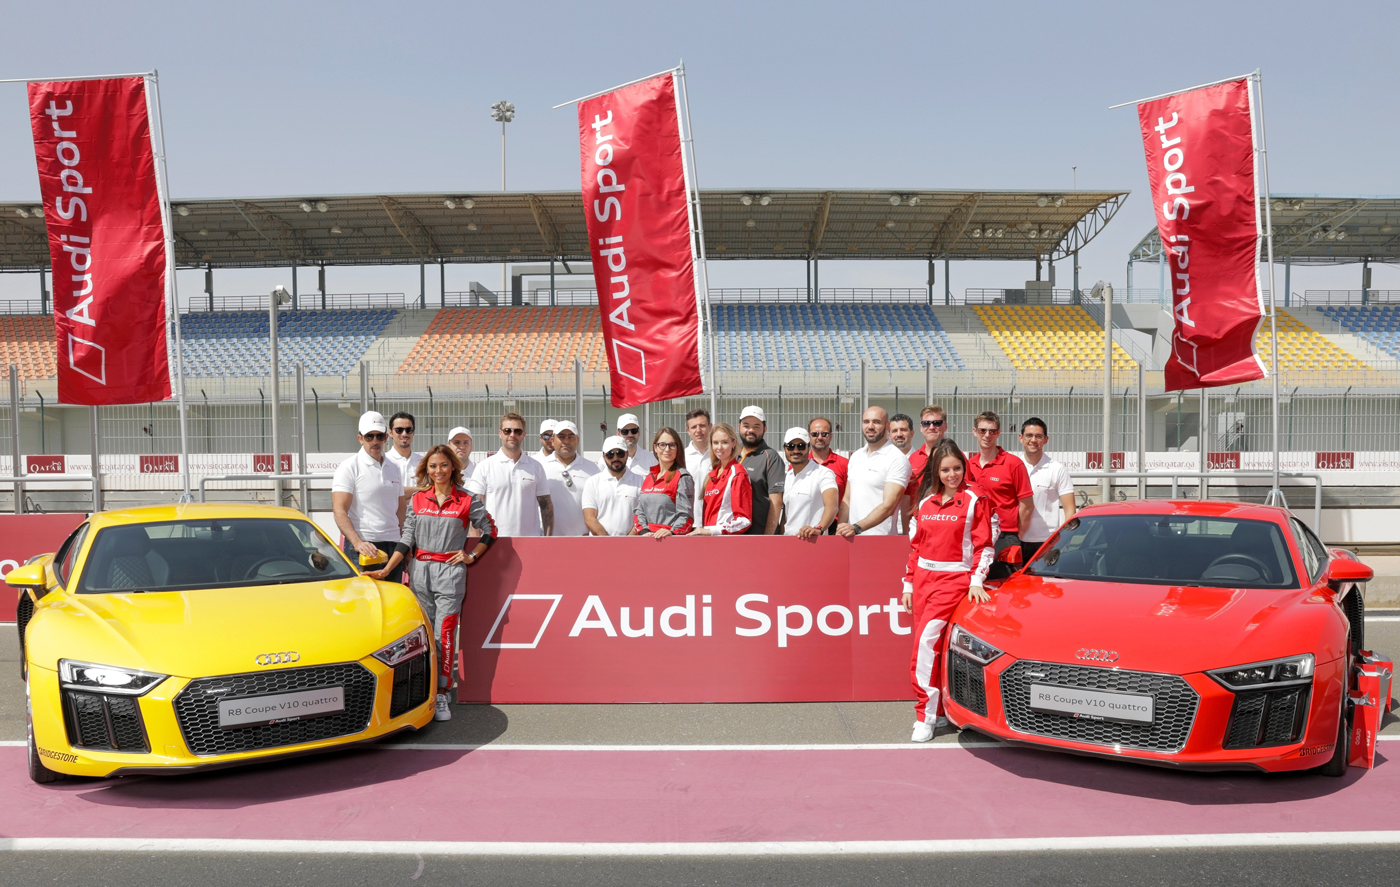 Spectacular event by Audi Qatar to instill pride to the brand